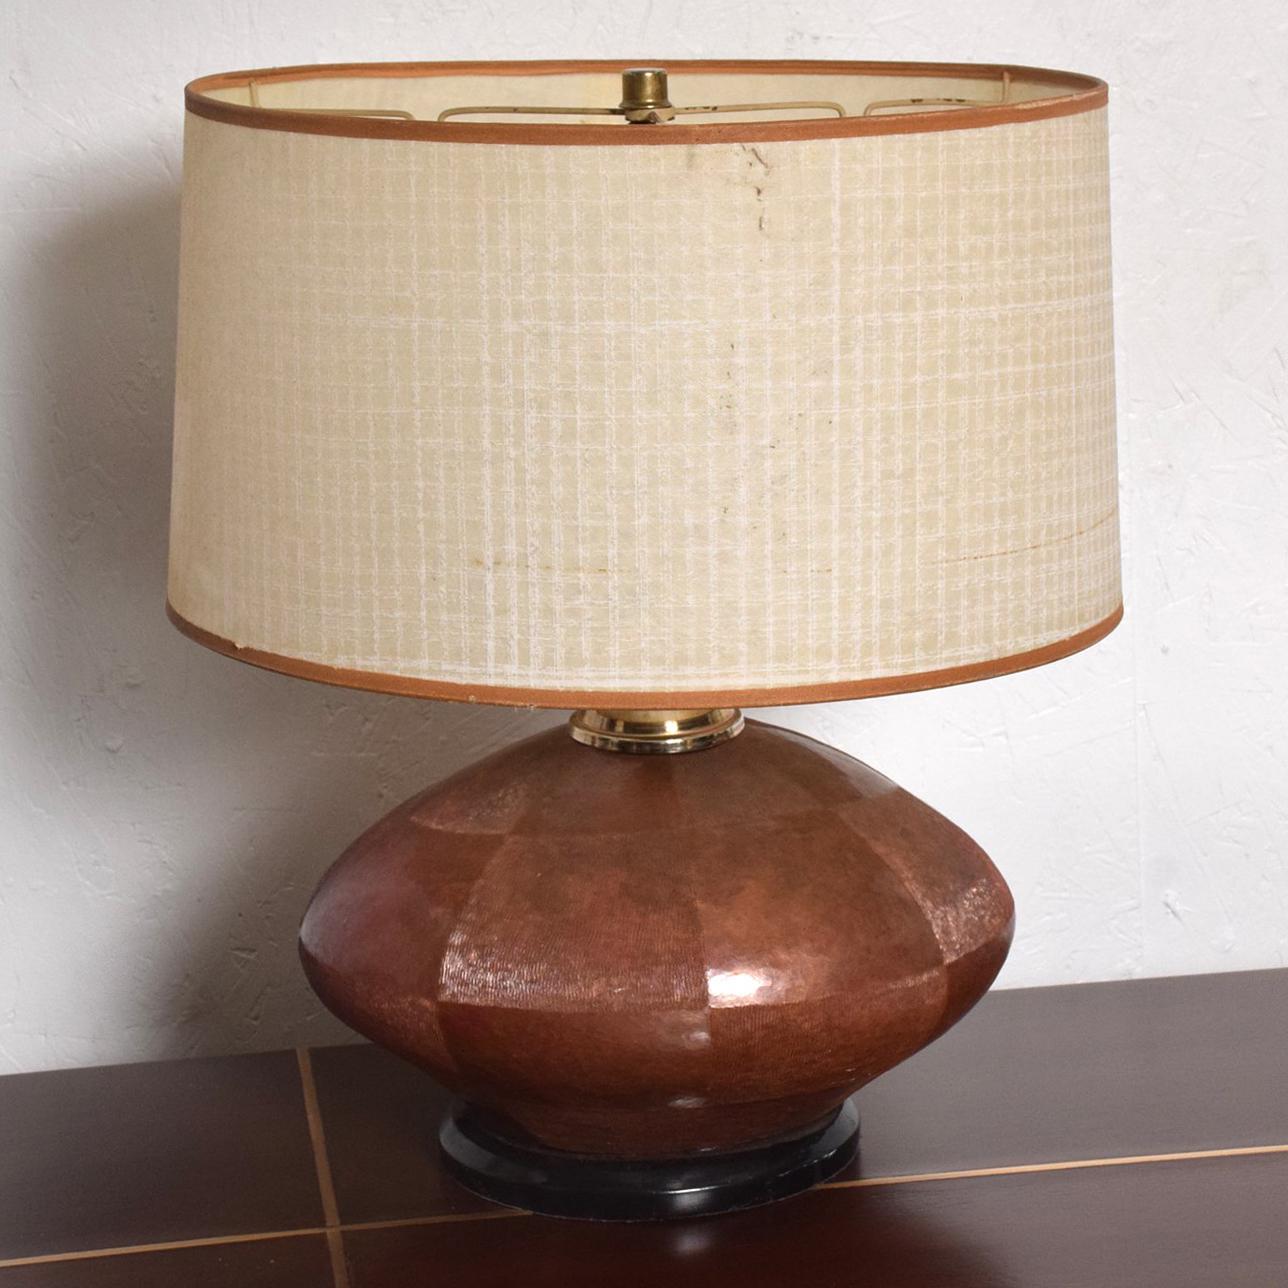 For your consideration a unique table lamp with a texturized and patinated cooper body mounted in a wood base (painted in black) and brass hardware. 

Lamp has been tested and currently working. Lampshade not included. Lamp has the original